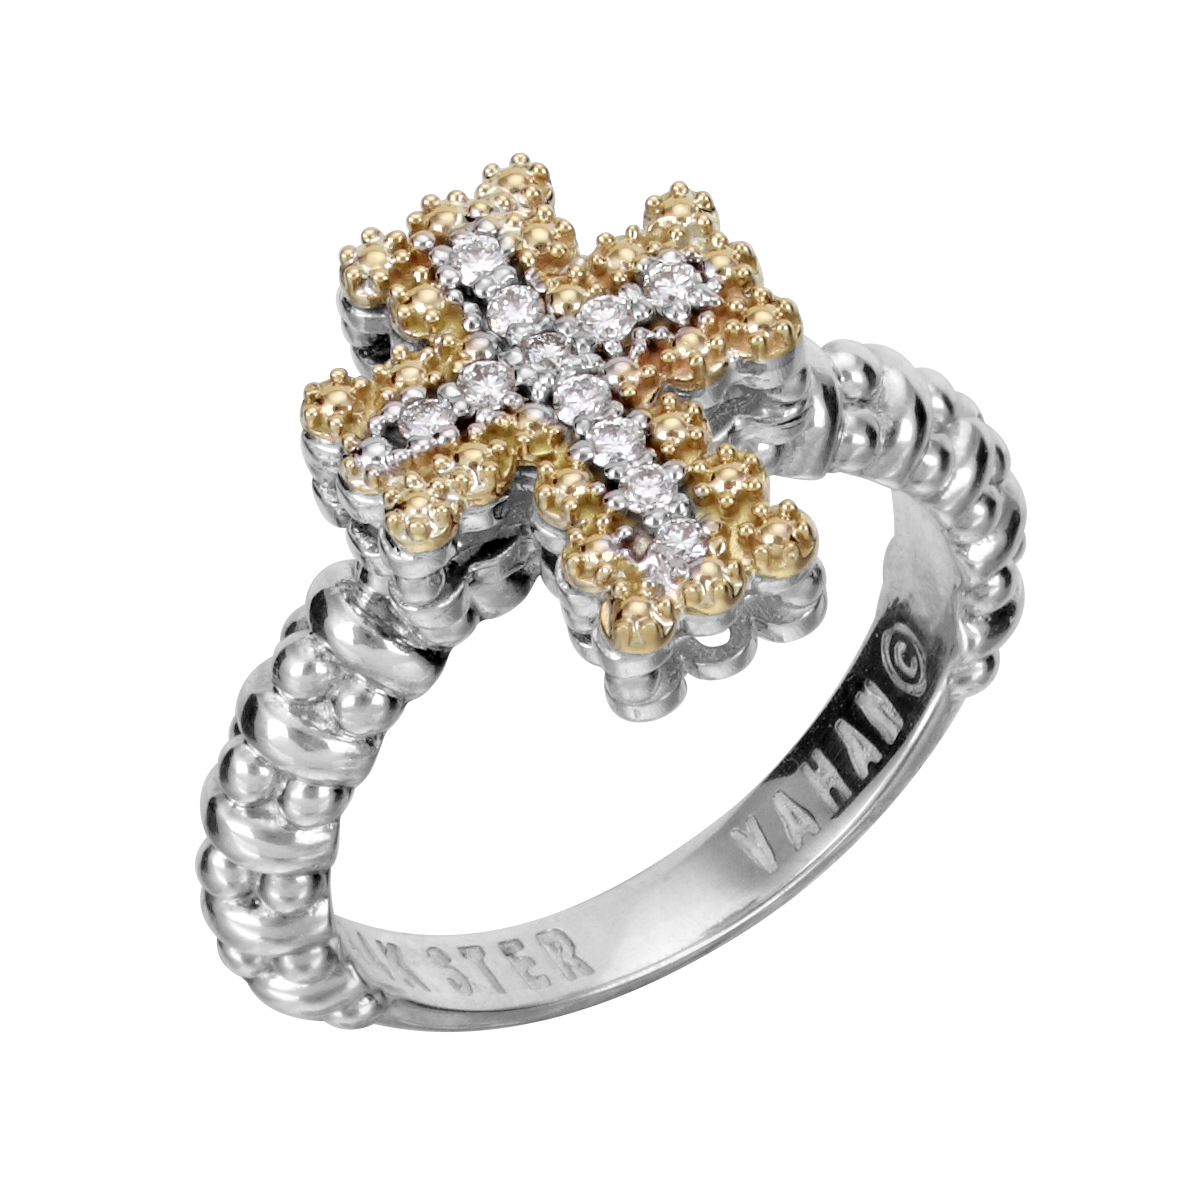 Vahan Cross Sterling Silver & Yellow Gold Diamond Fashion Ring Galloway and Moseley, Inc. Sumter, SC